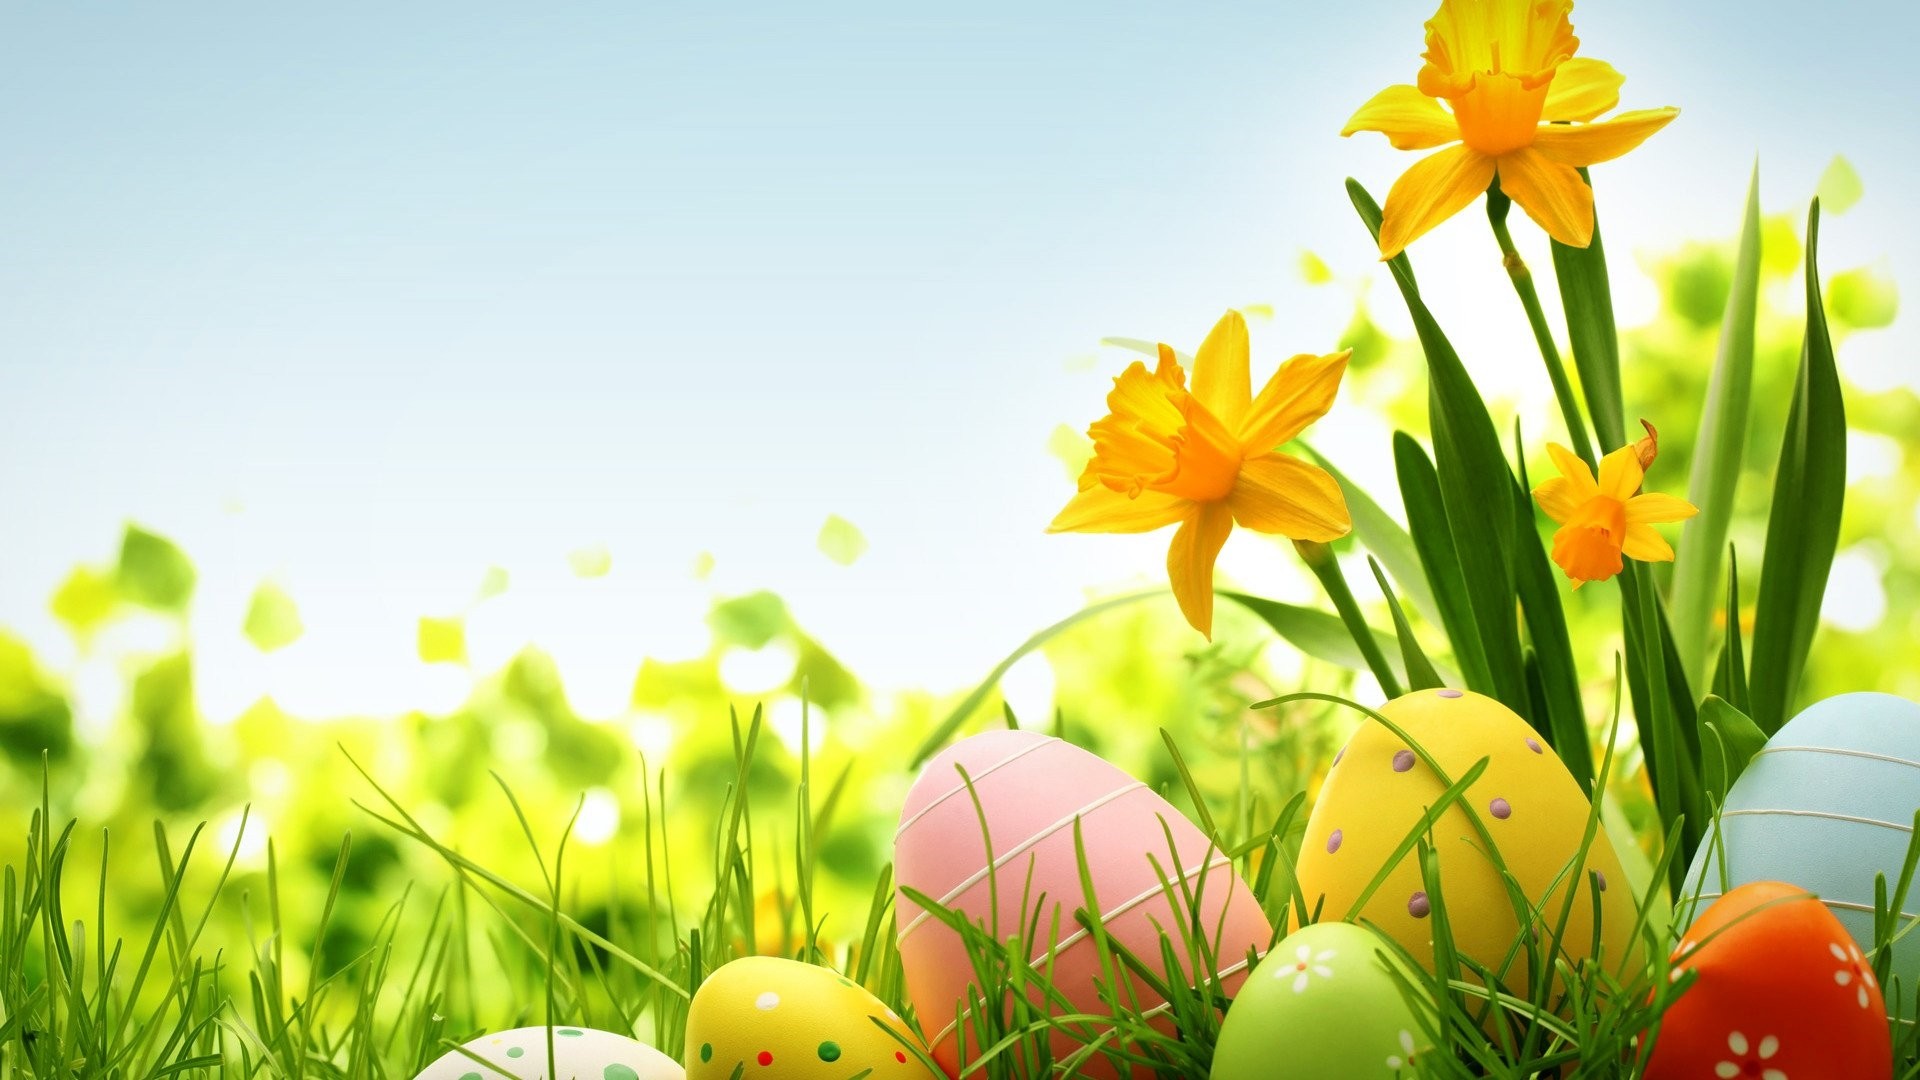 Happy Easter Image Pic